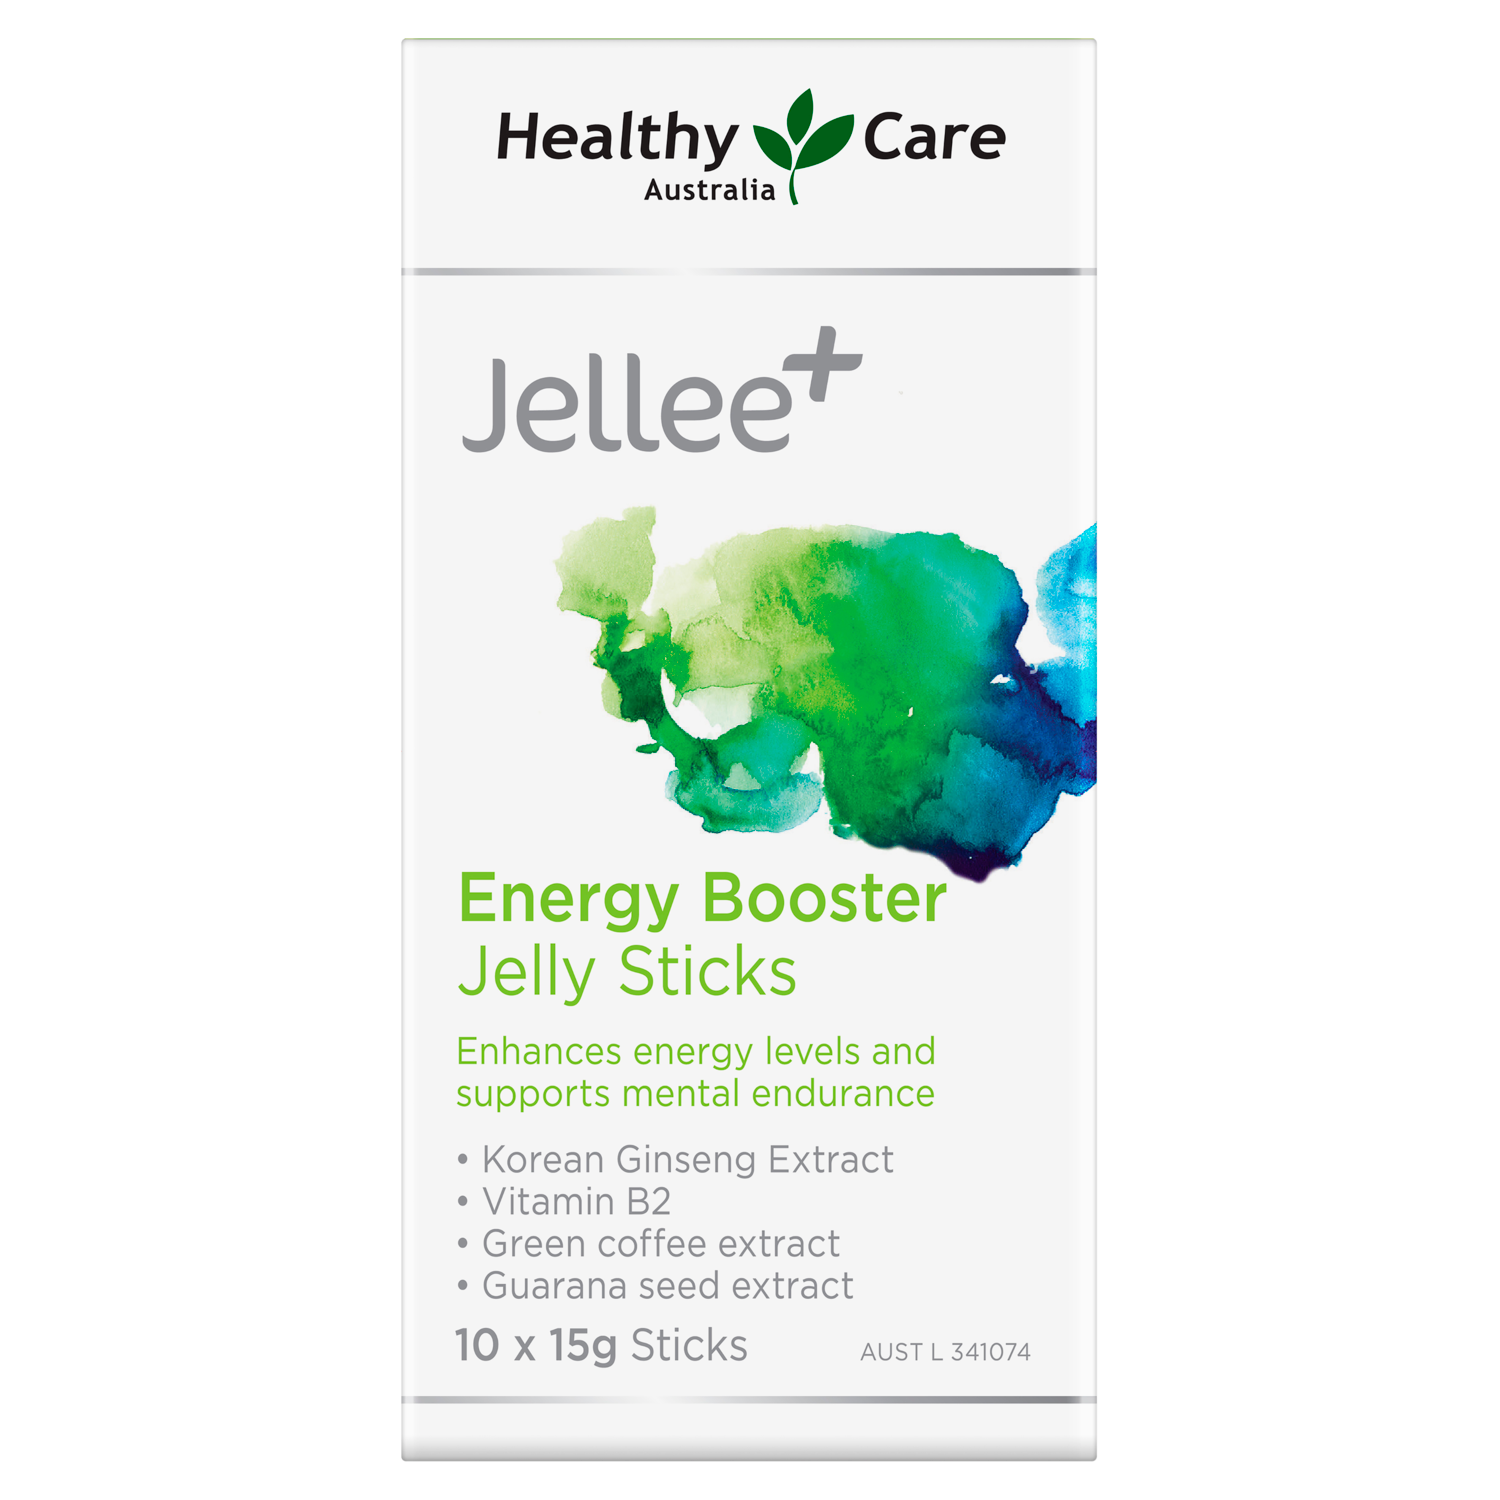 Jellee+ Energy Booster Jelly Sticks 10 x 15g Label-Vitamins & Supplements-Healthy Care Australia